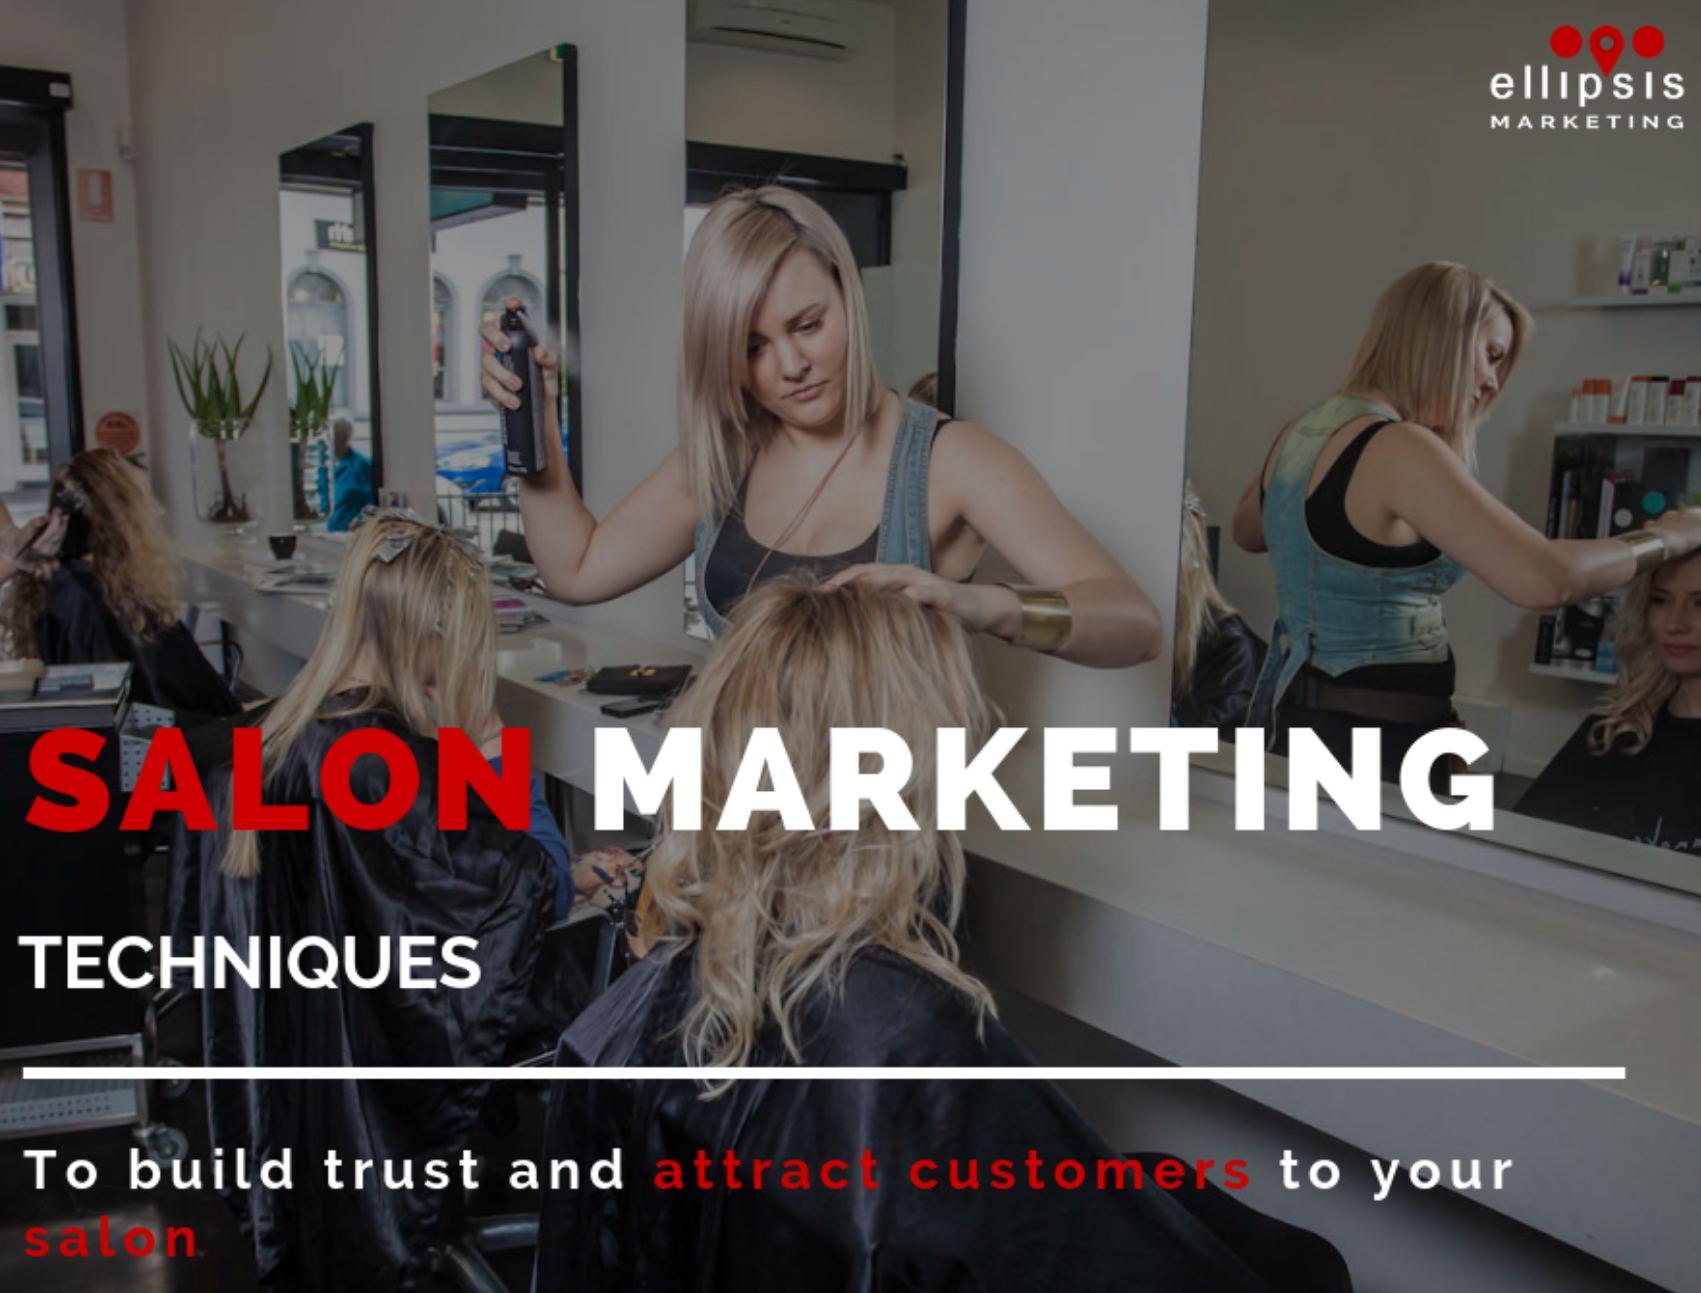 Local Marketing Ideas for Salons